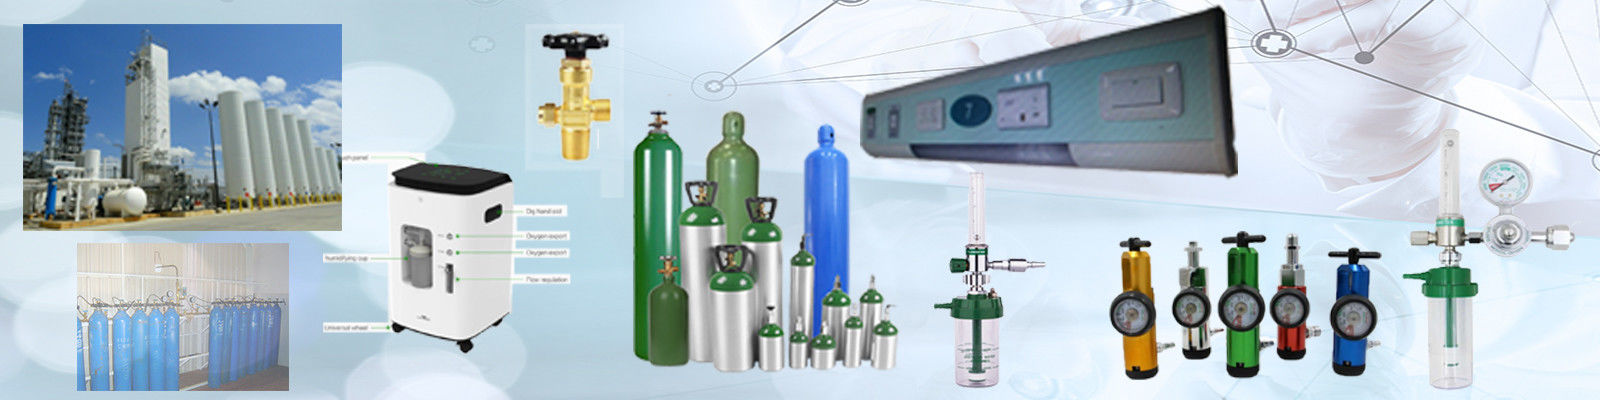 China best GAS EQUIPMENT on sales